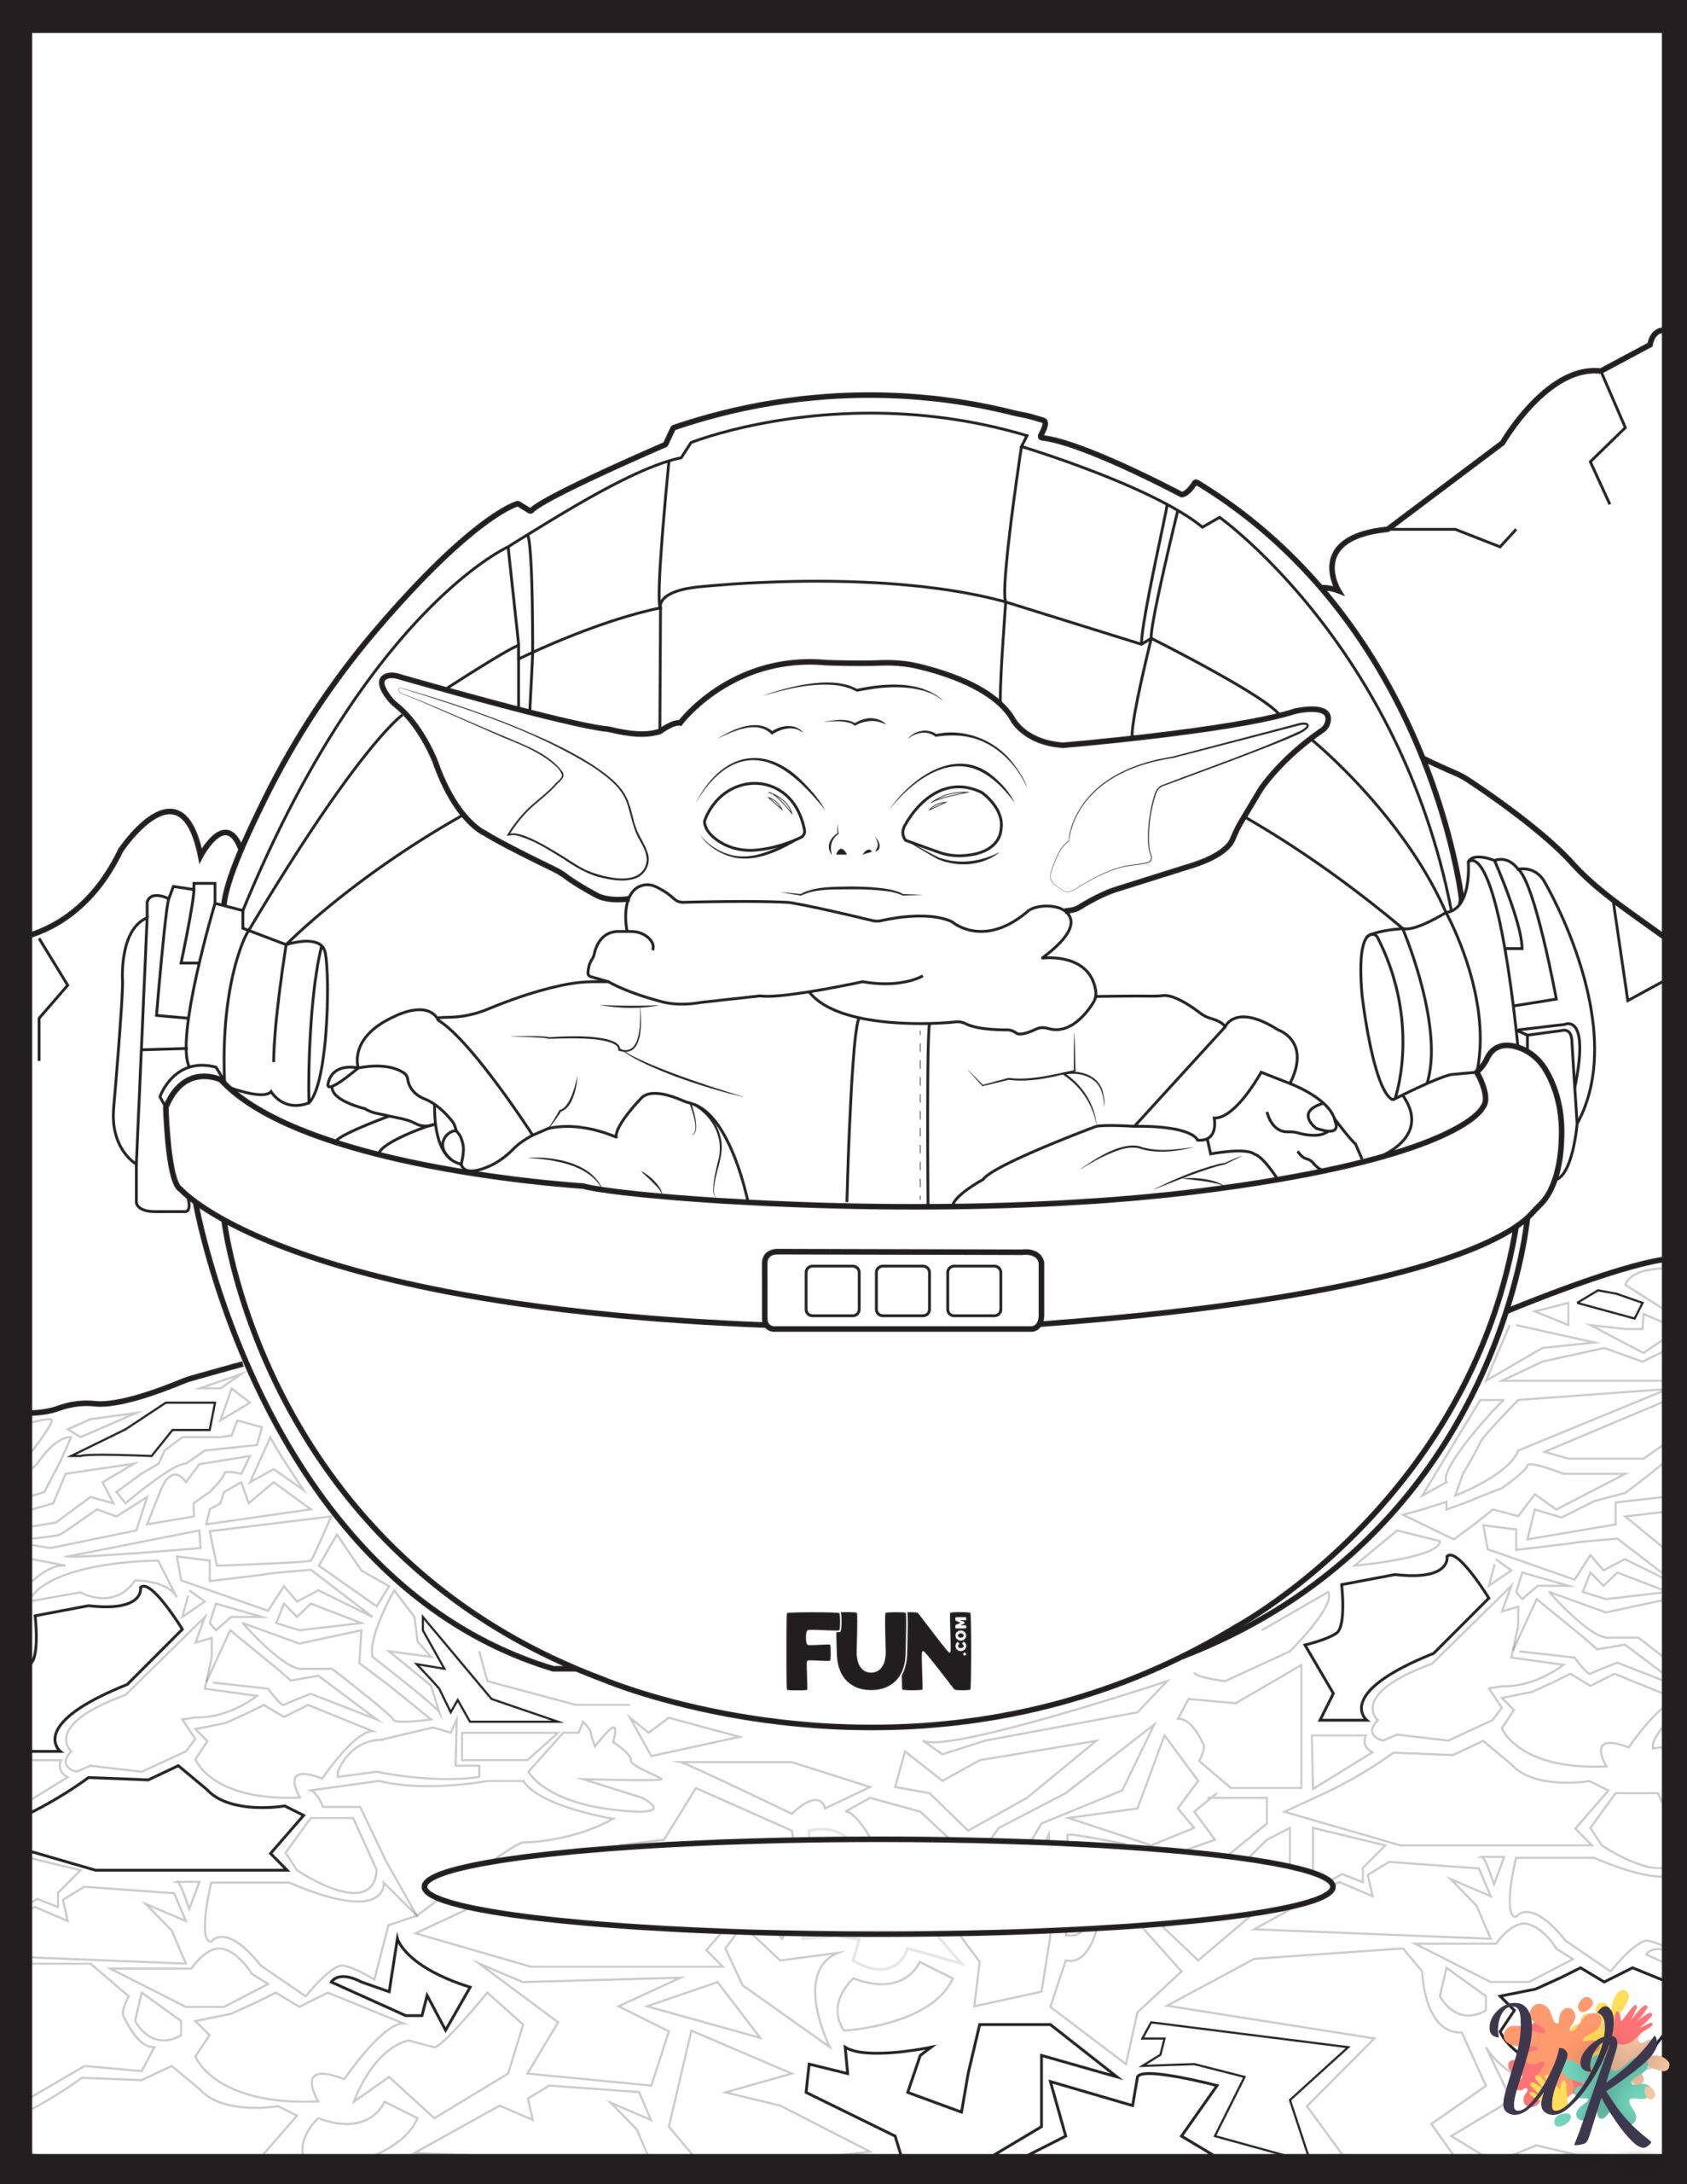 Star Wars coloring pages printable free